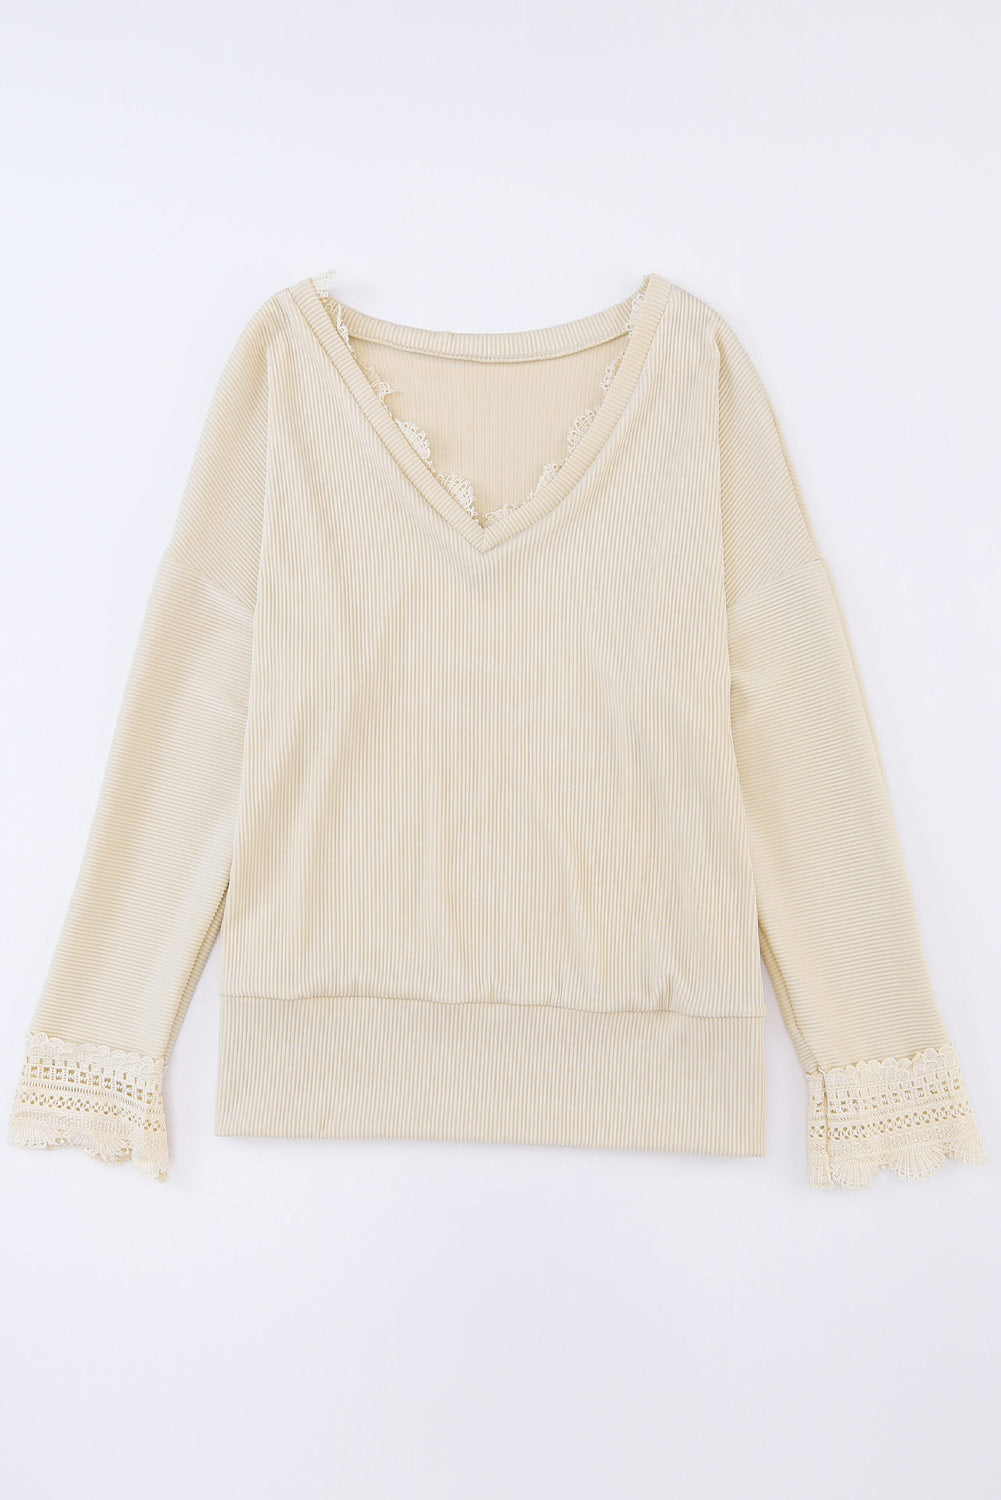 Apricot Ribbed Texture Lace Trim V Neck Long Sleeve Top-10